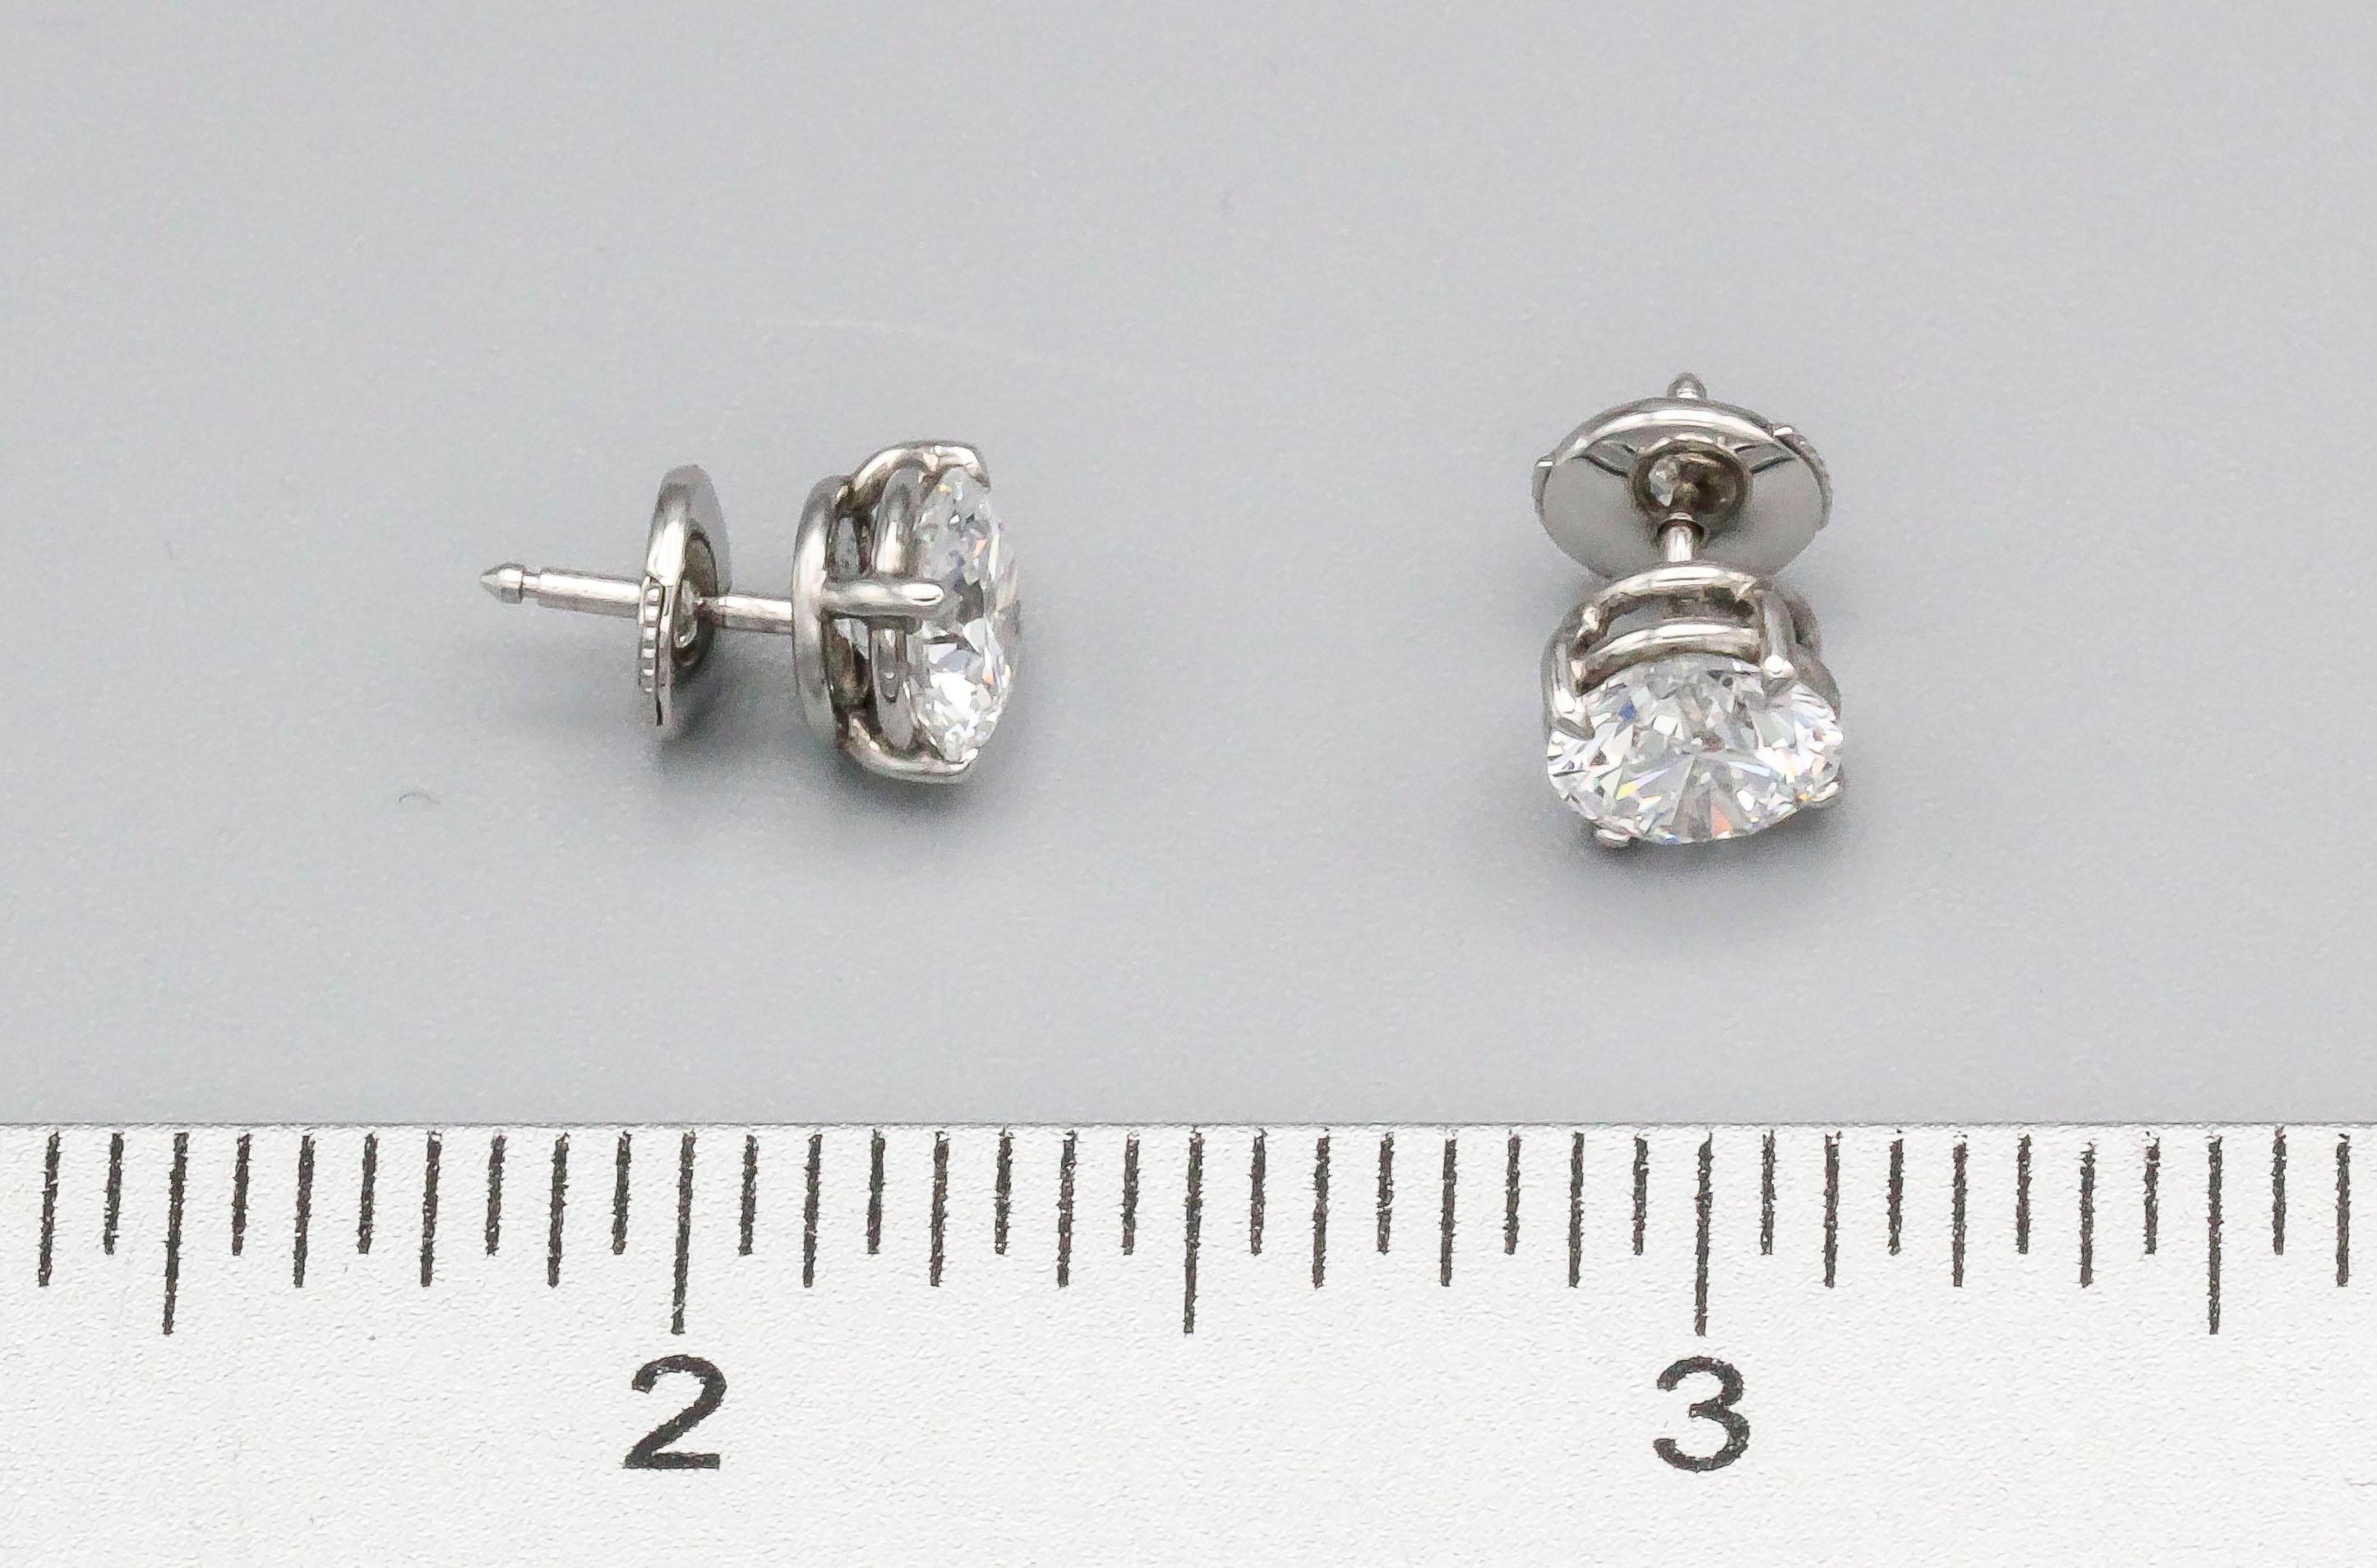 Exceptional diamond and platinum stud earrings. The first round brilliant cut diamond is 1.55 carats in weight, D color, Internally Flawless clarity; with excellent cut grade, excellent polish, and excellent symmetry .  The second round brilliant